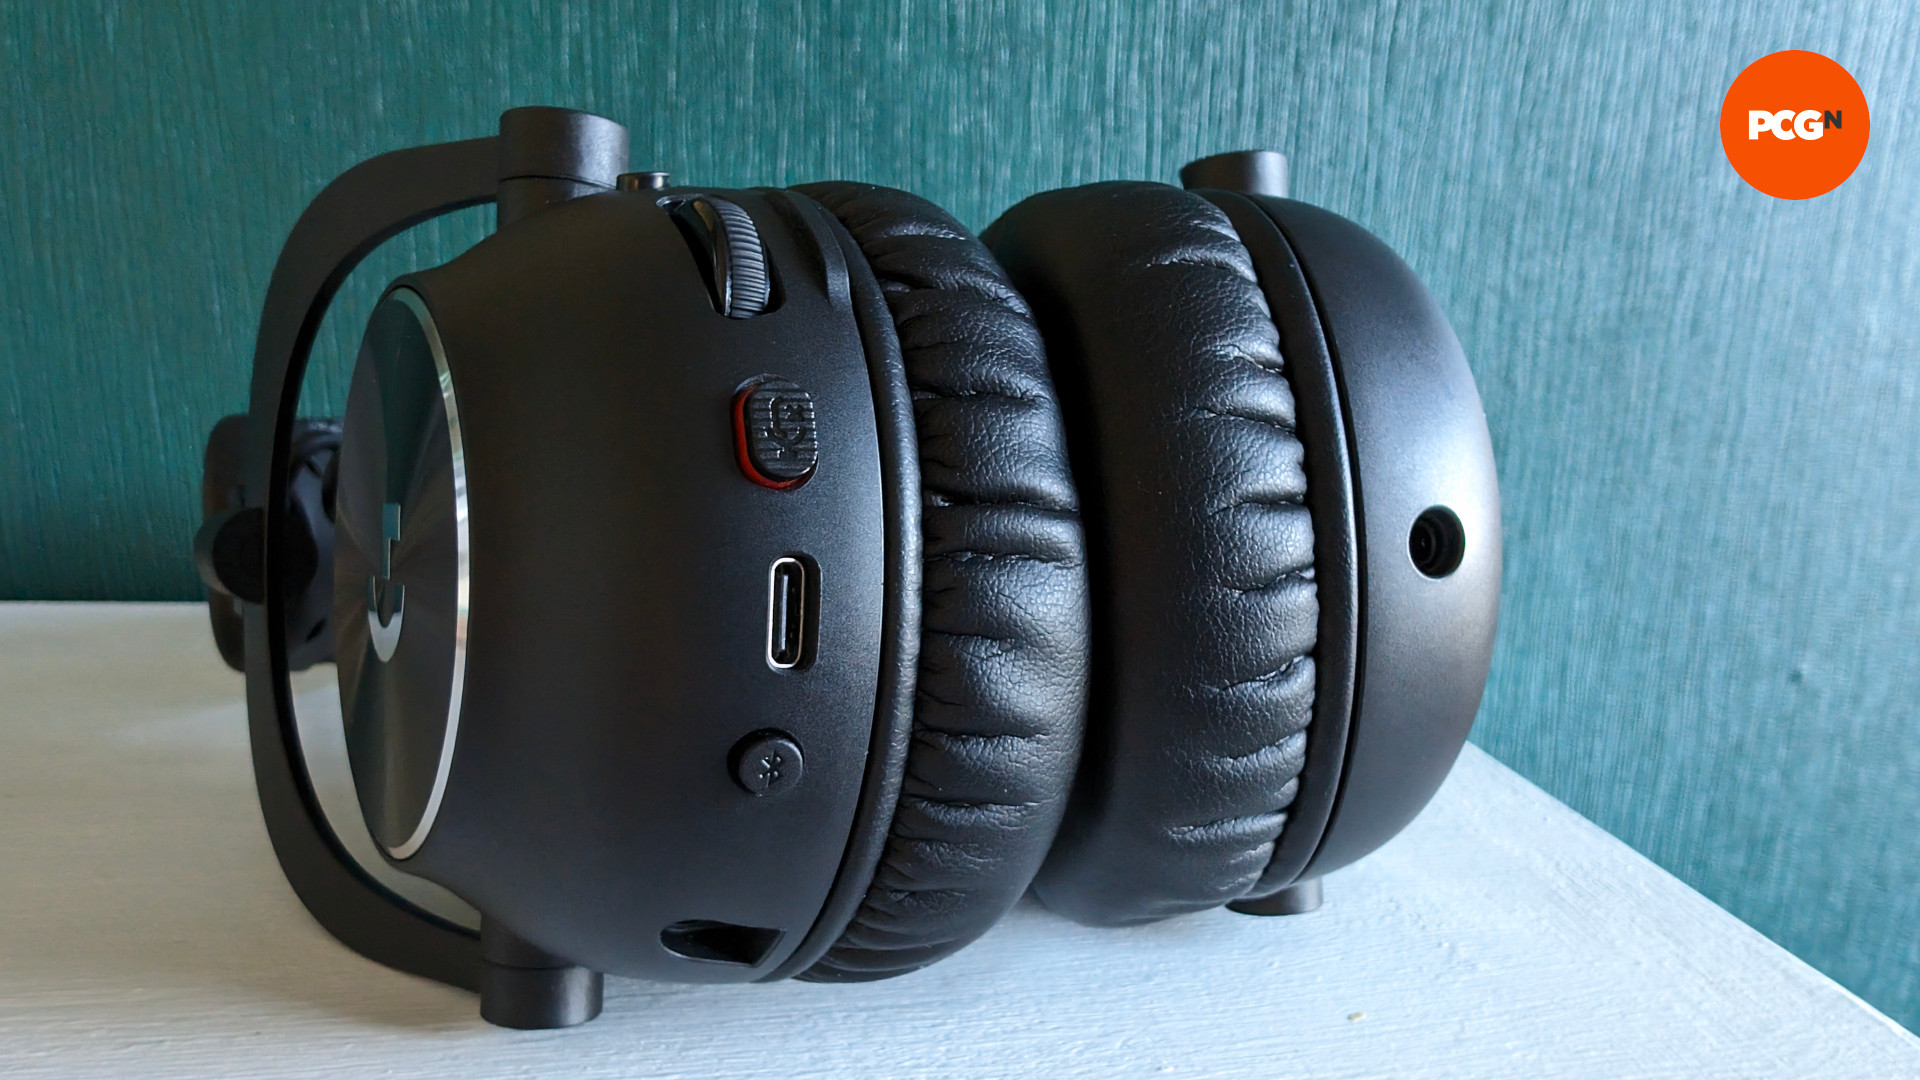 Logitech G Pro X 2 Lightspeed review: You'll really hear the difference